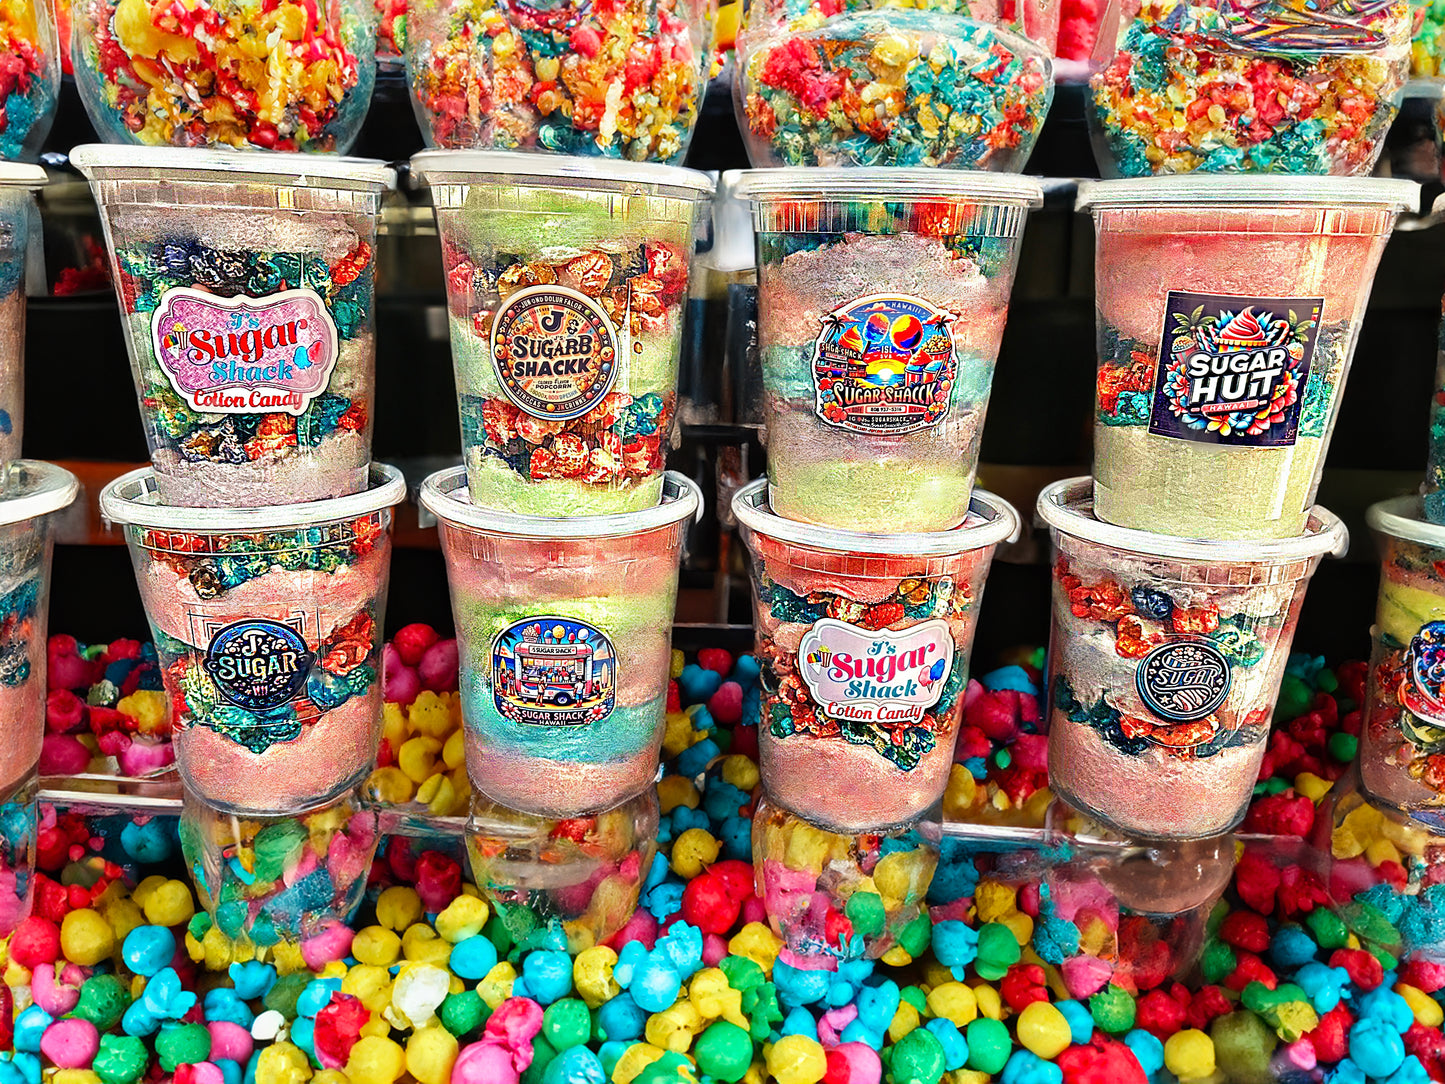 Sweet Symphony Tub: Cotton Candy & Colorful Caramel Popcorn Delight 🍭🍿